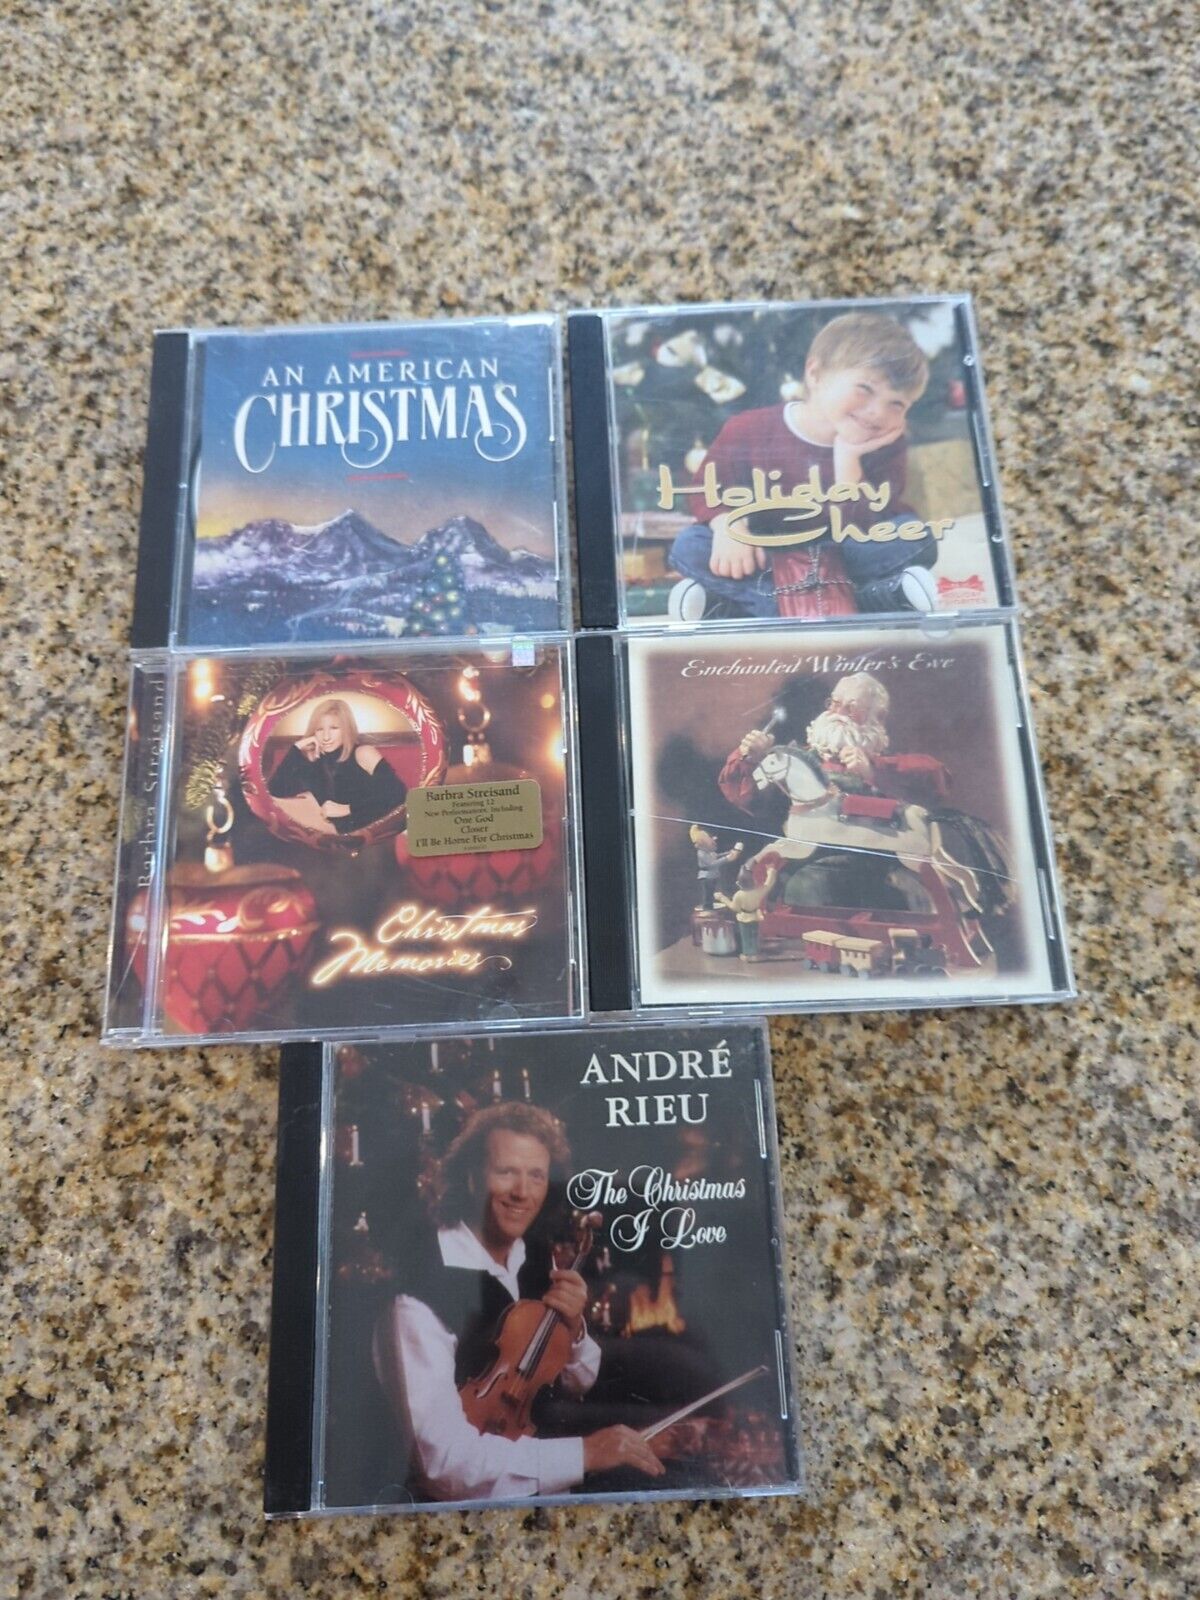 Lot of 5 Christmas CDS - L4 Holiday Cheer, Streisand, Enchanted Winters Eve, Rie